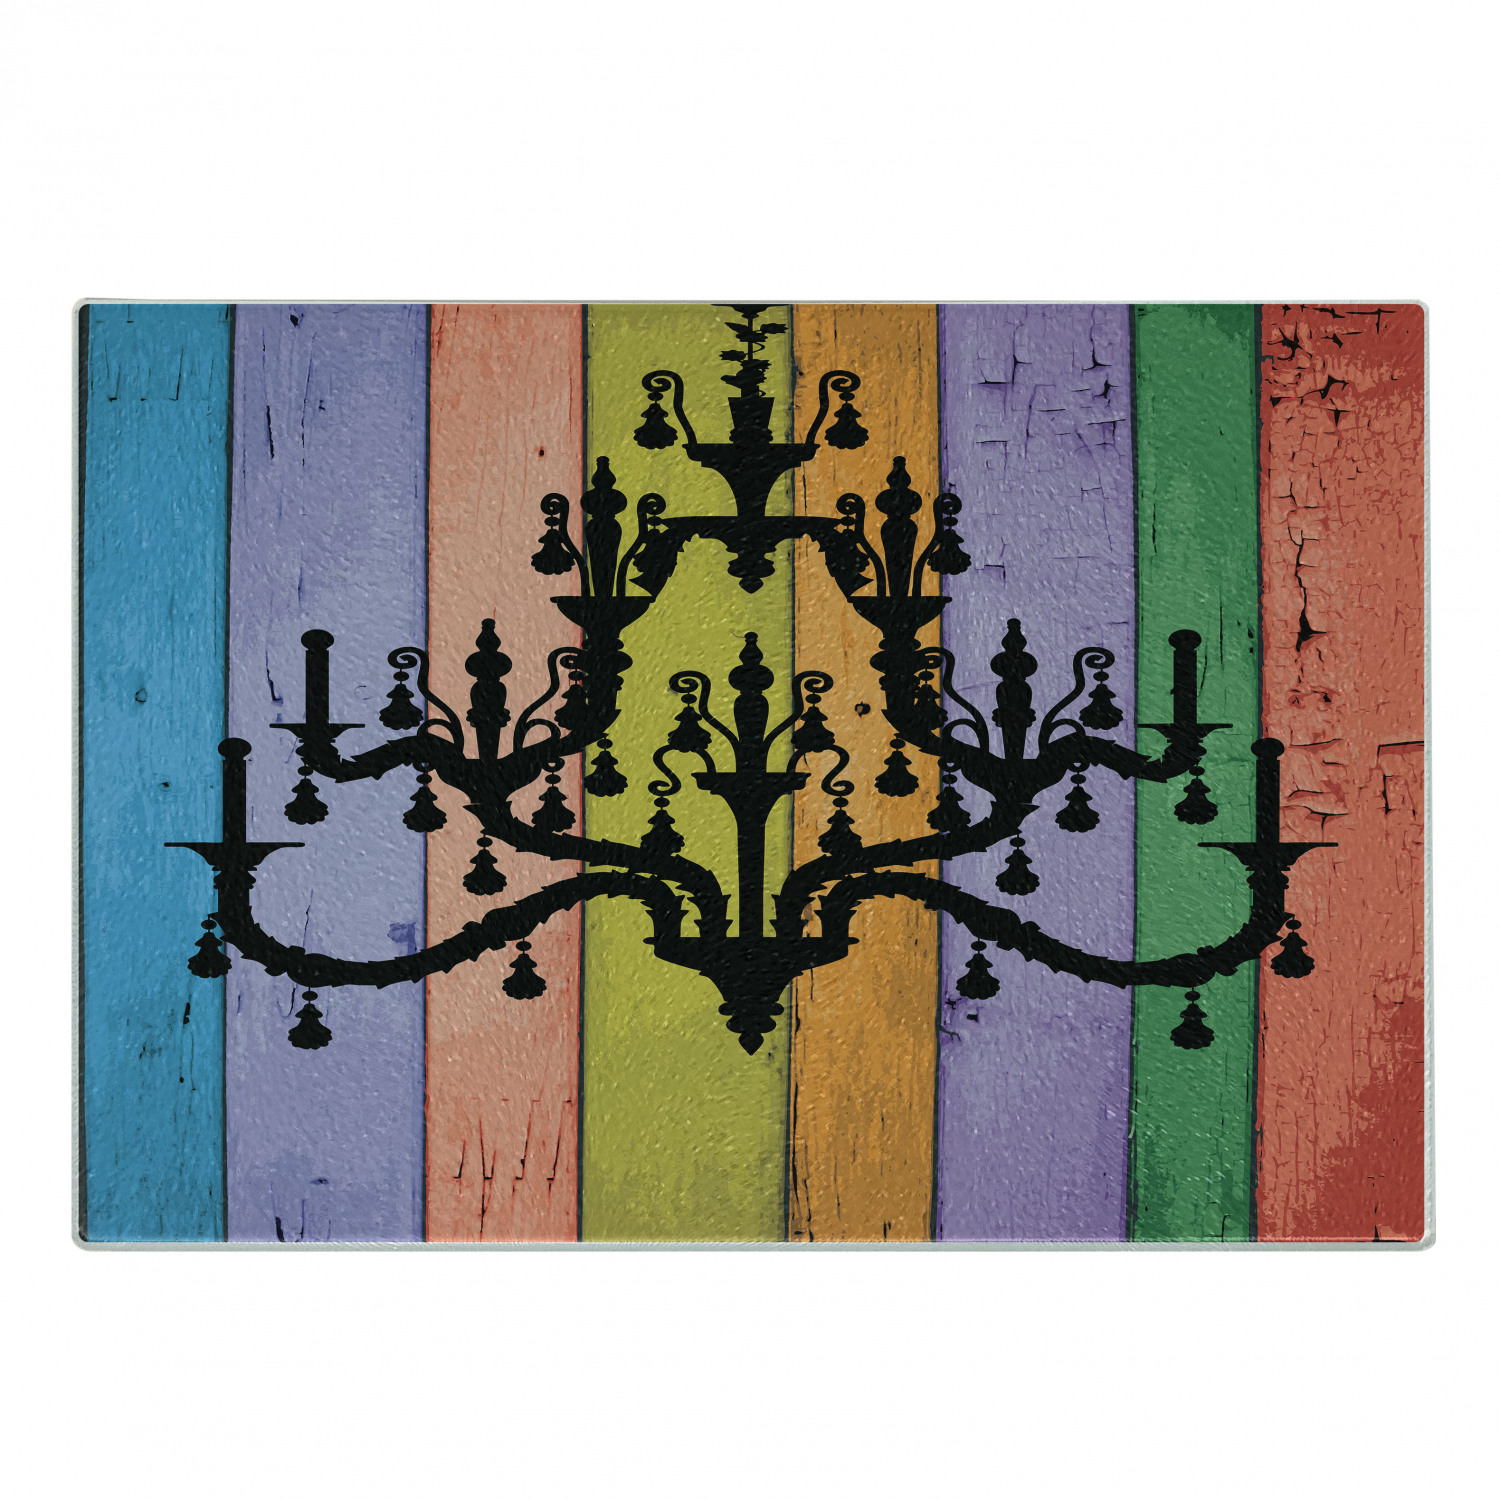 Vintage Cutting Board, Silhouette of an Old Victorian Chandelier on Colorful Rustic Wooden Planks Image, Decorative Tempered Glass Cutting and Serving Board, in 3 Sizes, by Ambesonne - image 1 of 2